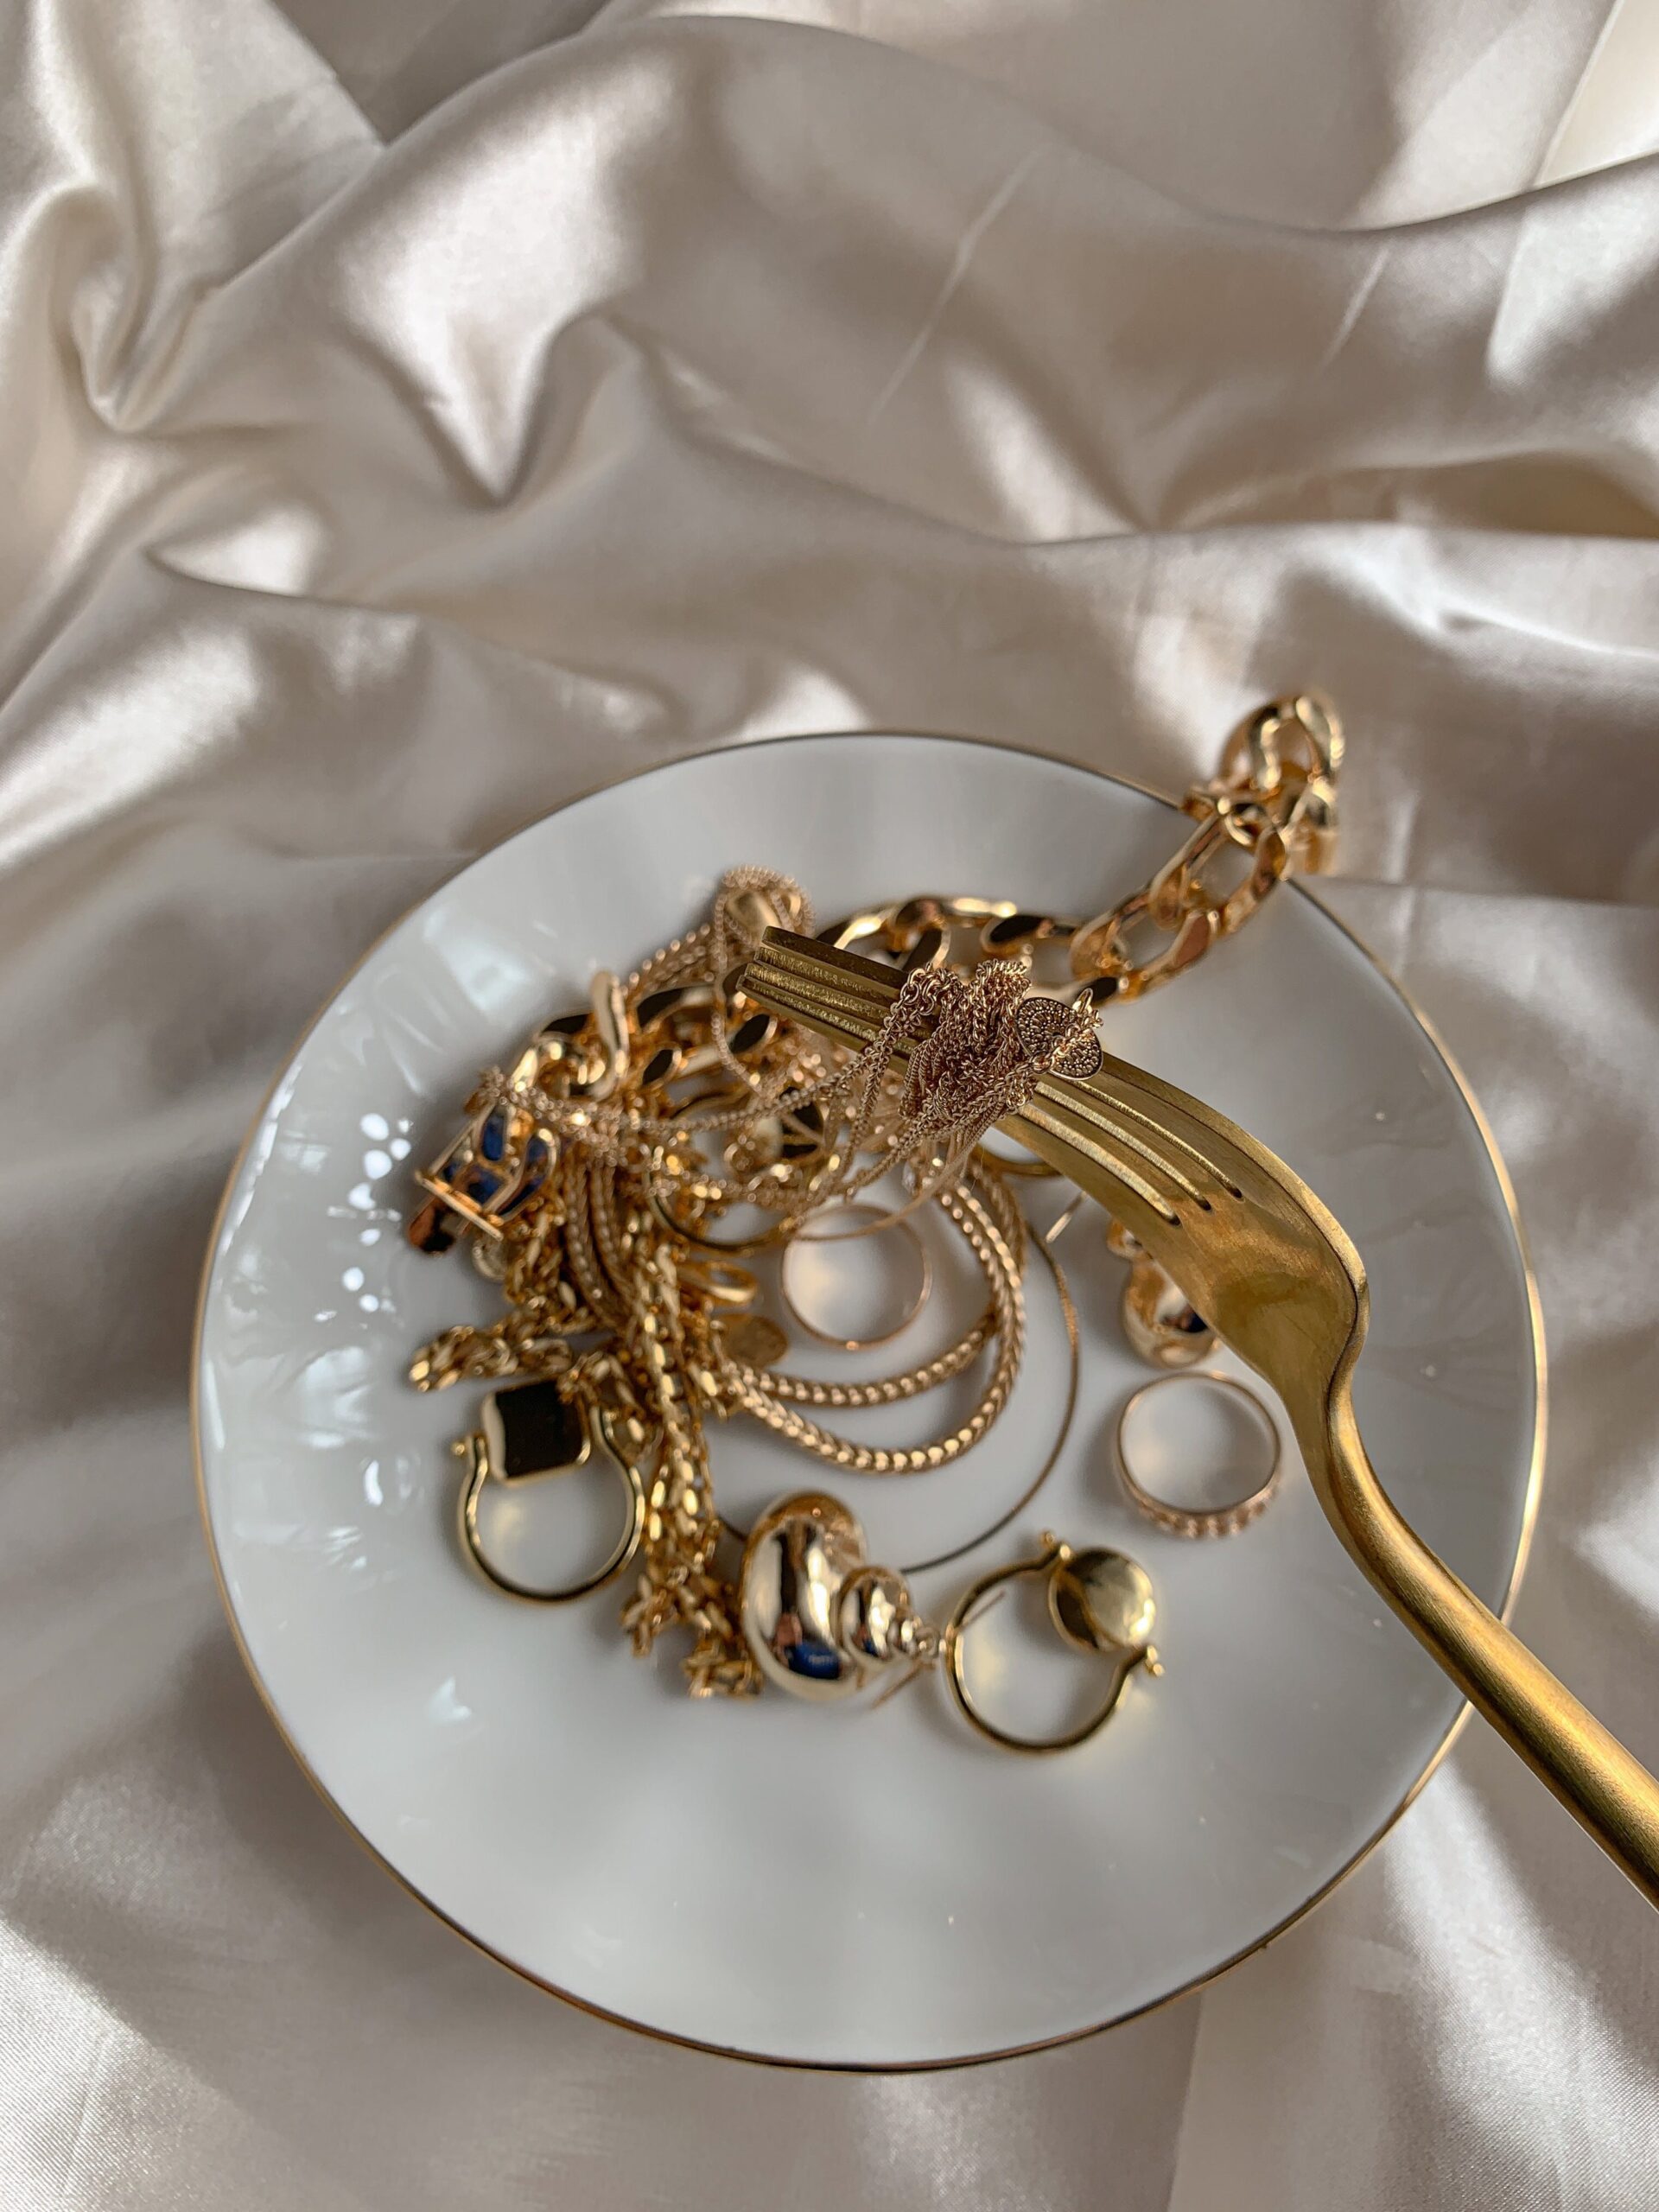 How to clean gold plated jewellery